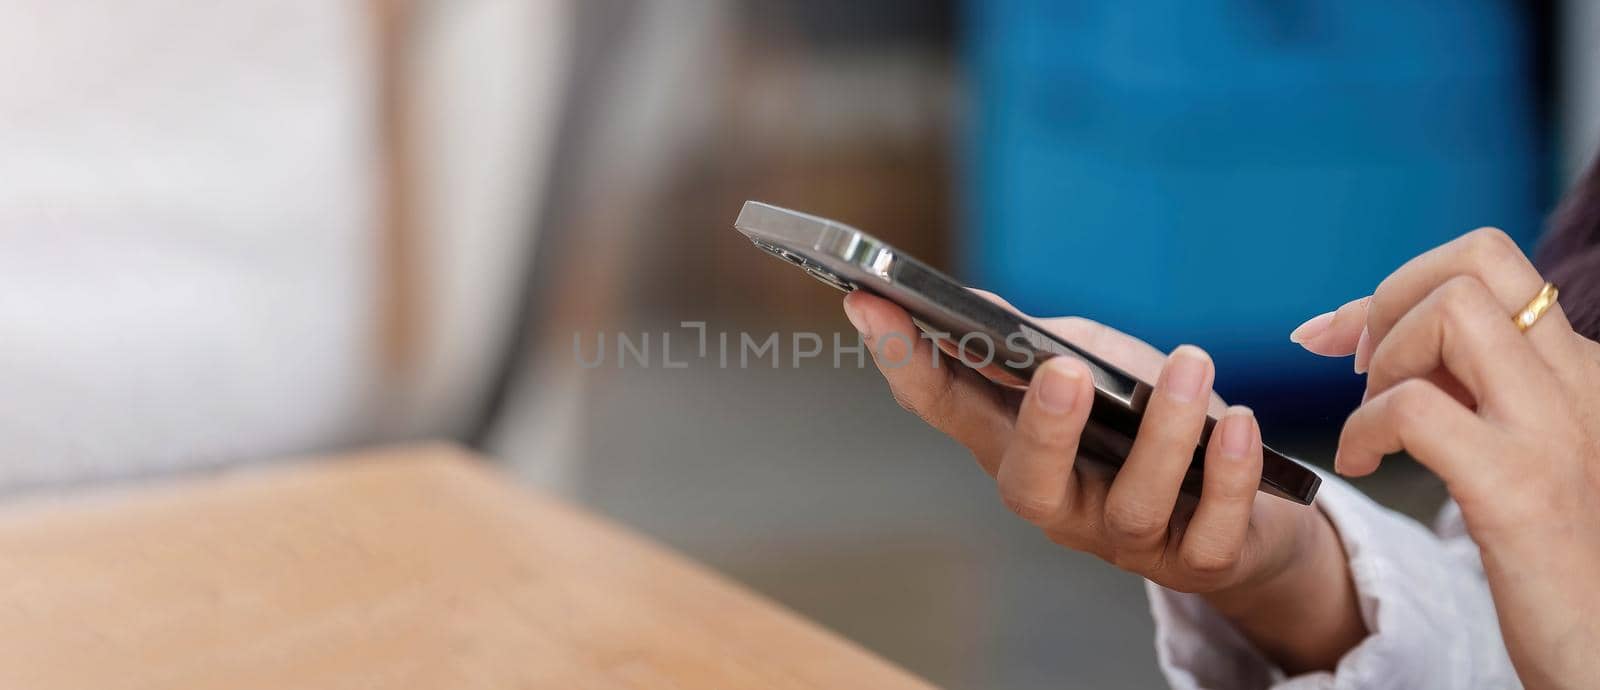 Close up of woman using cellphone and typing text message on smartphone device.